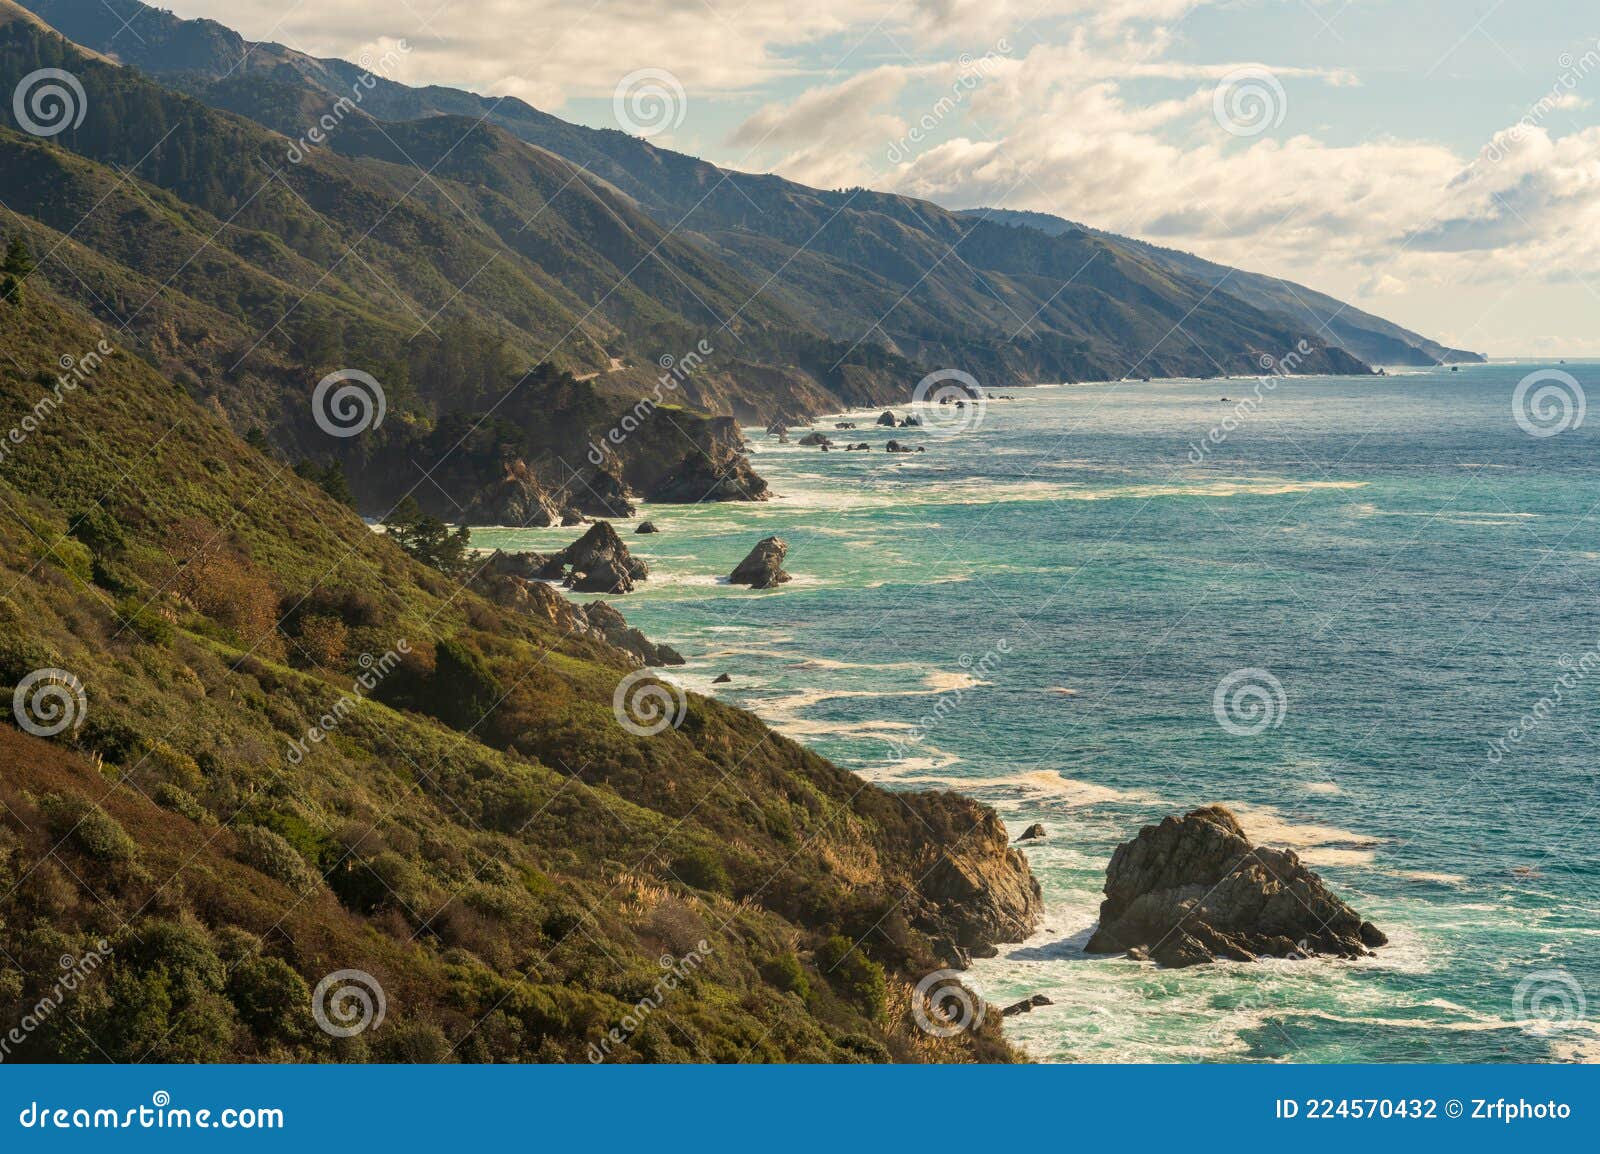 Coastal View Of Big Sur In California Stock Photo Image Of Landscape